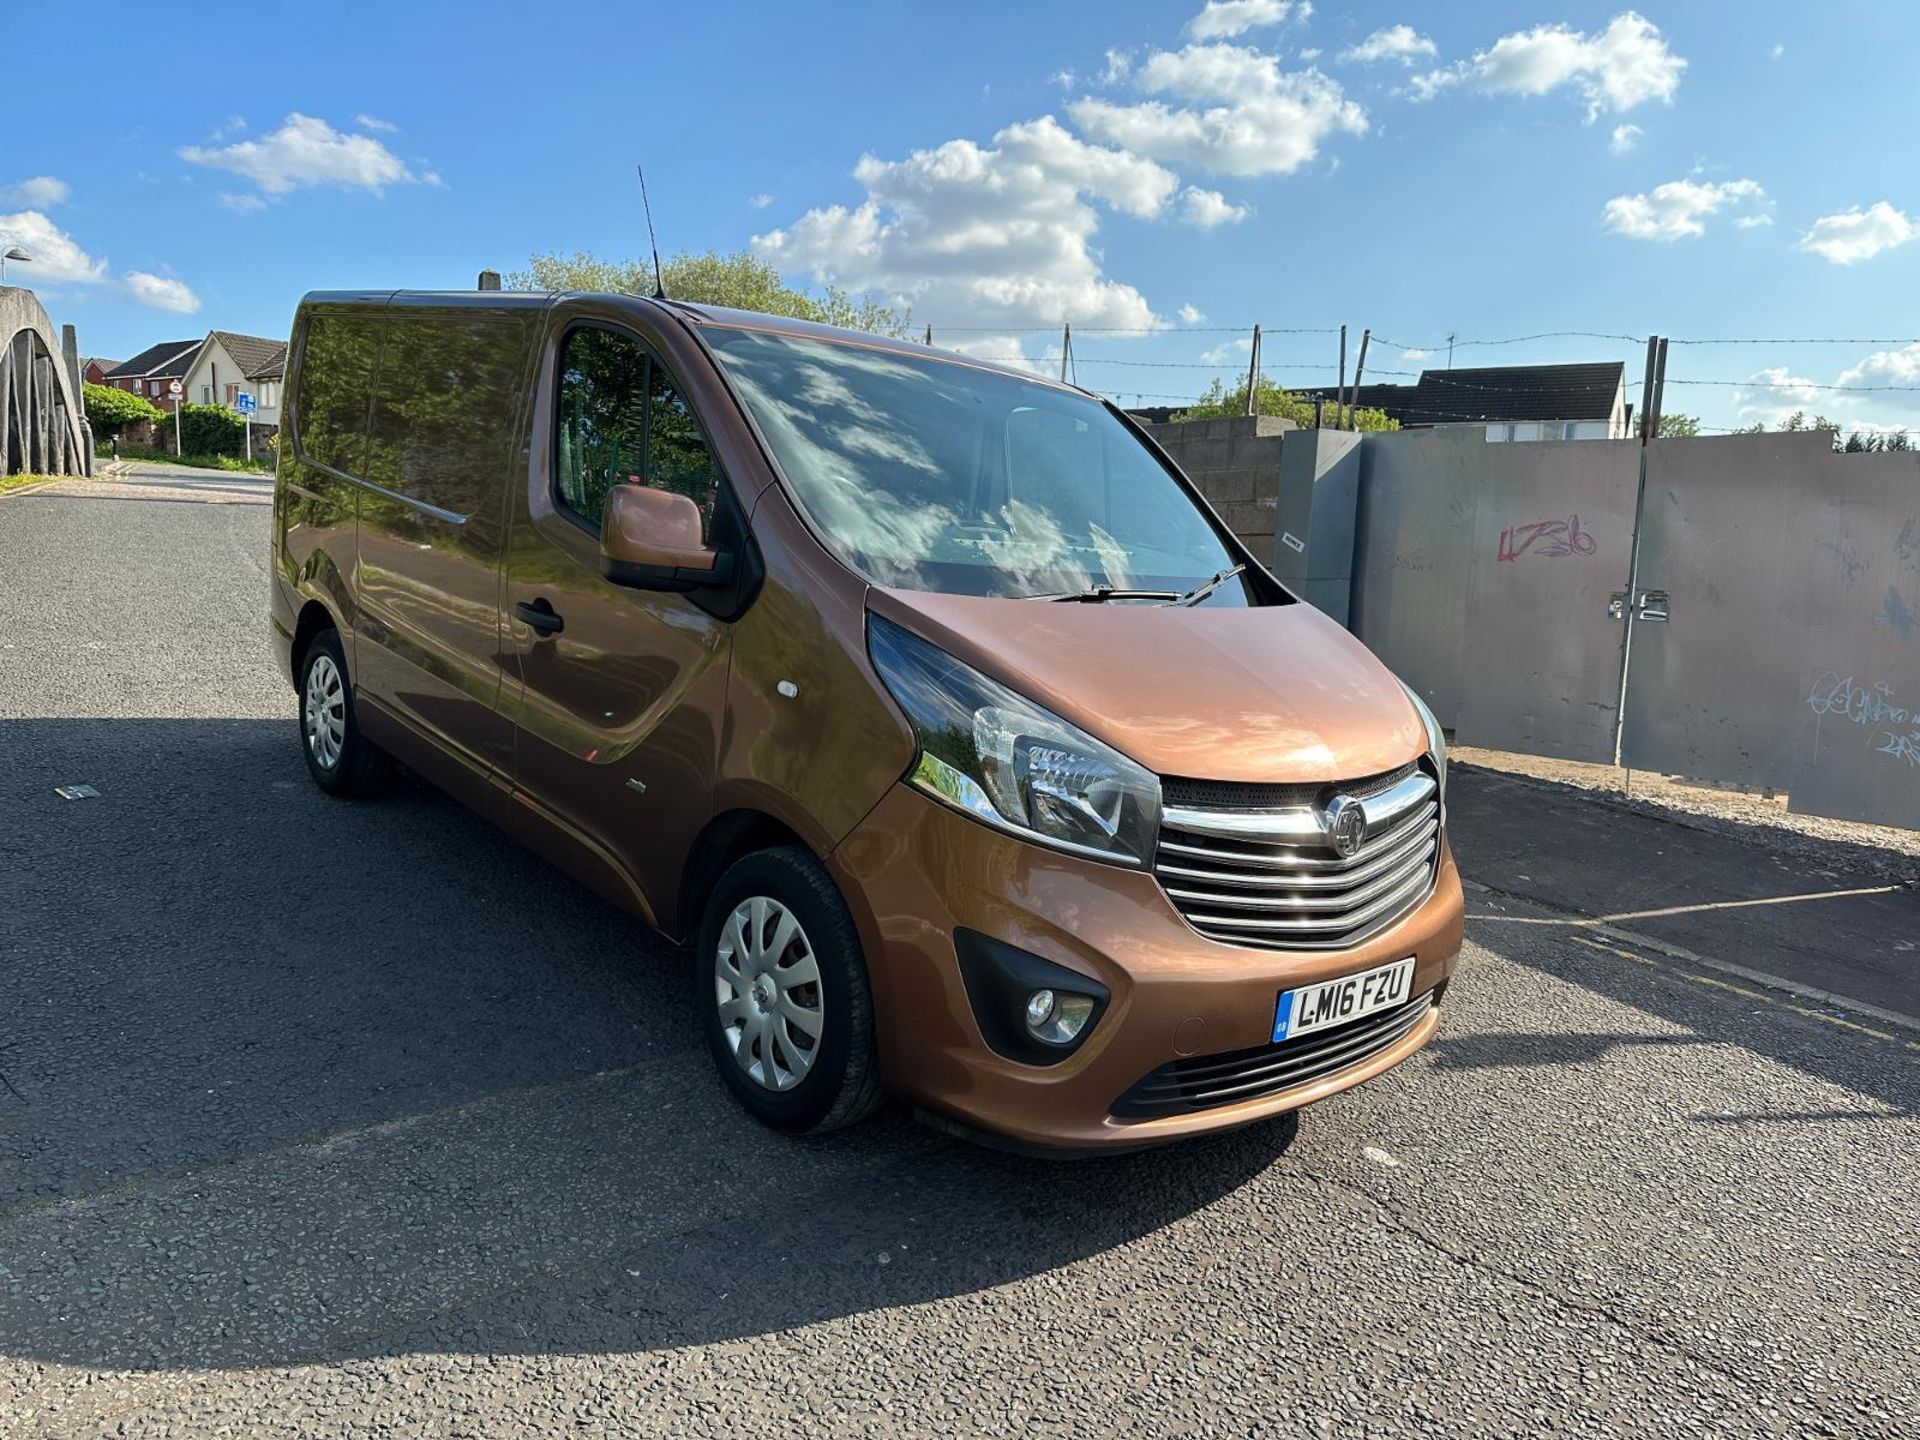 16 PLATE VIVARO READY FOR WORK: REMOTE LOCKING AND ELECTRIC WINDOWS - Image 2 of 12